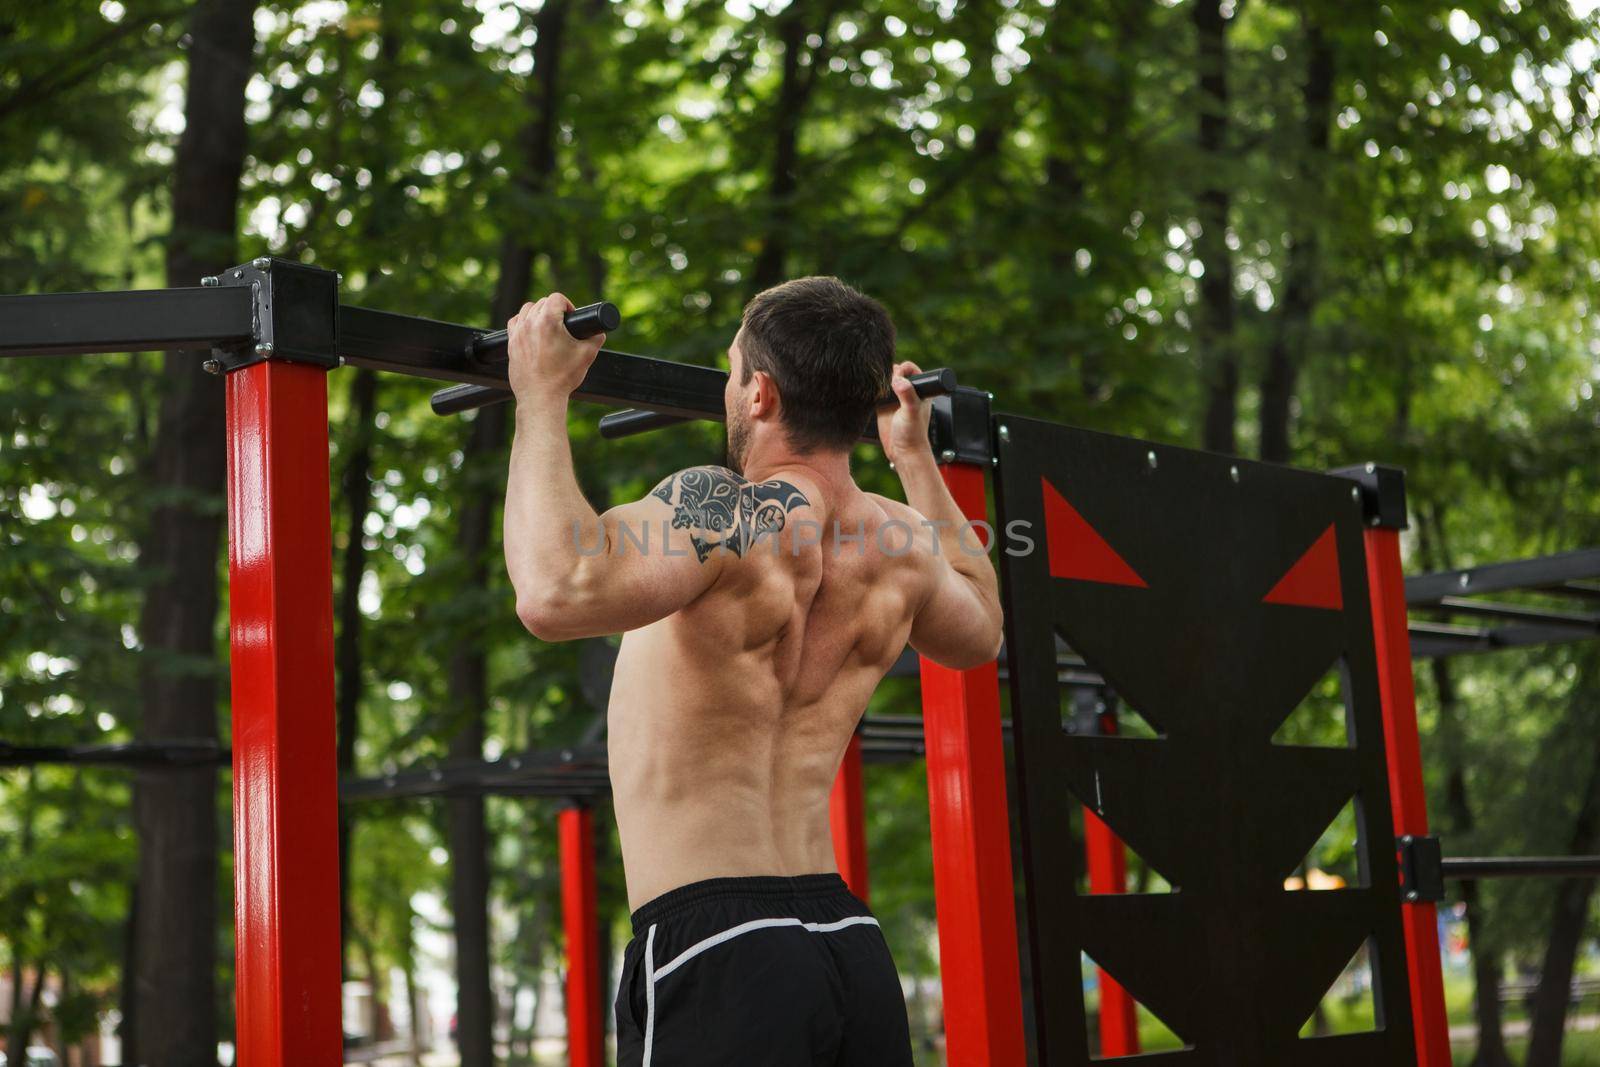 Shirtless muscular male athlete with ripped torso doing ull ups outdoors